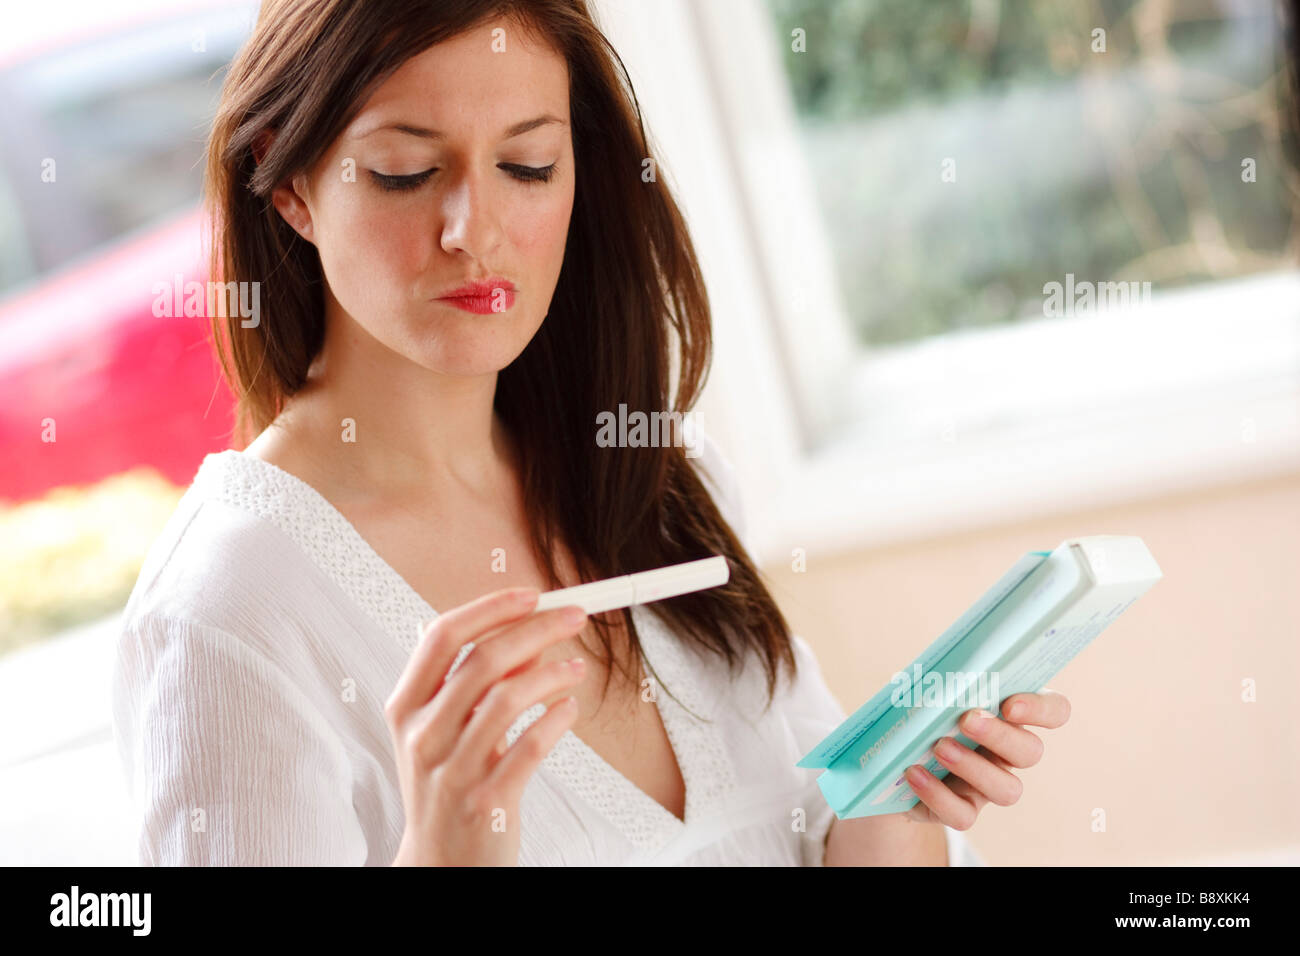 Woman looking at results of pregnancy test Stock Photo